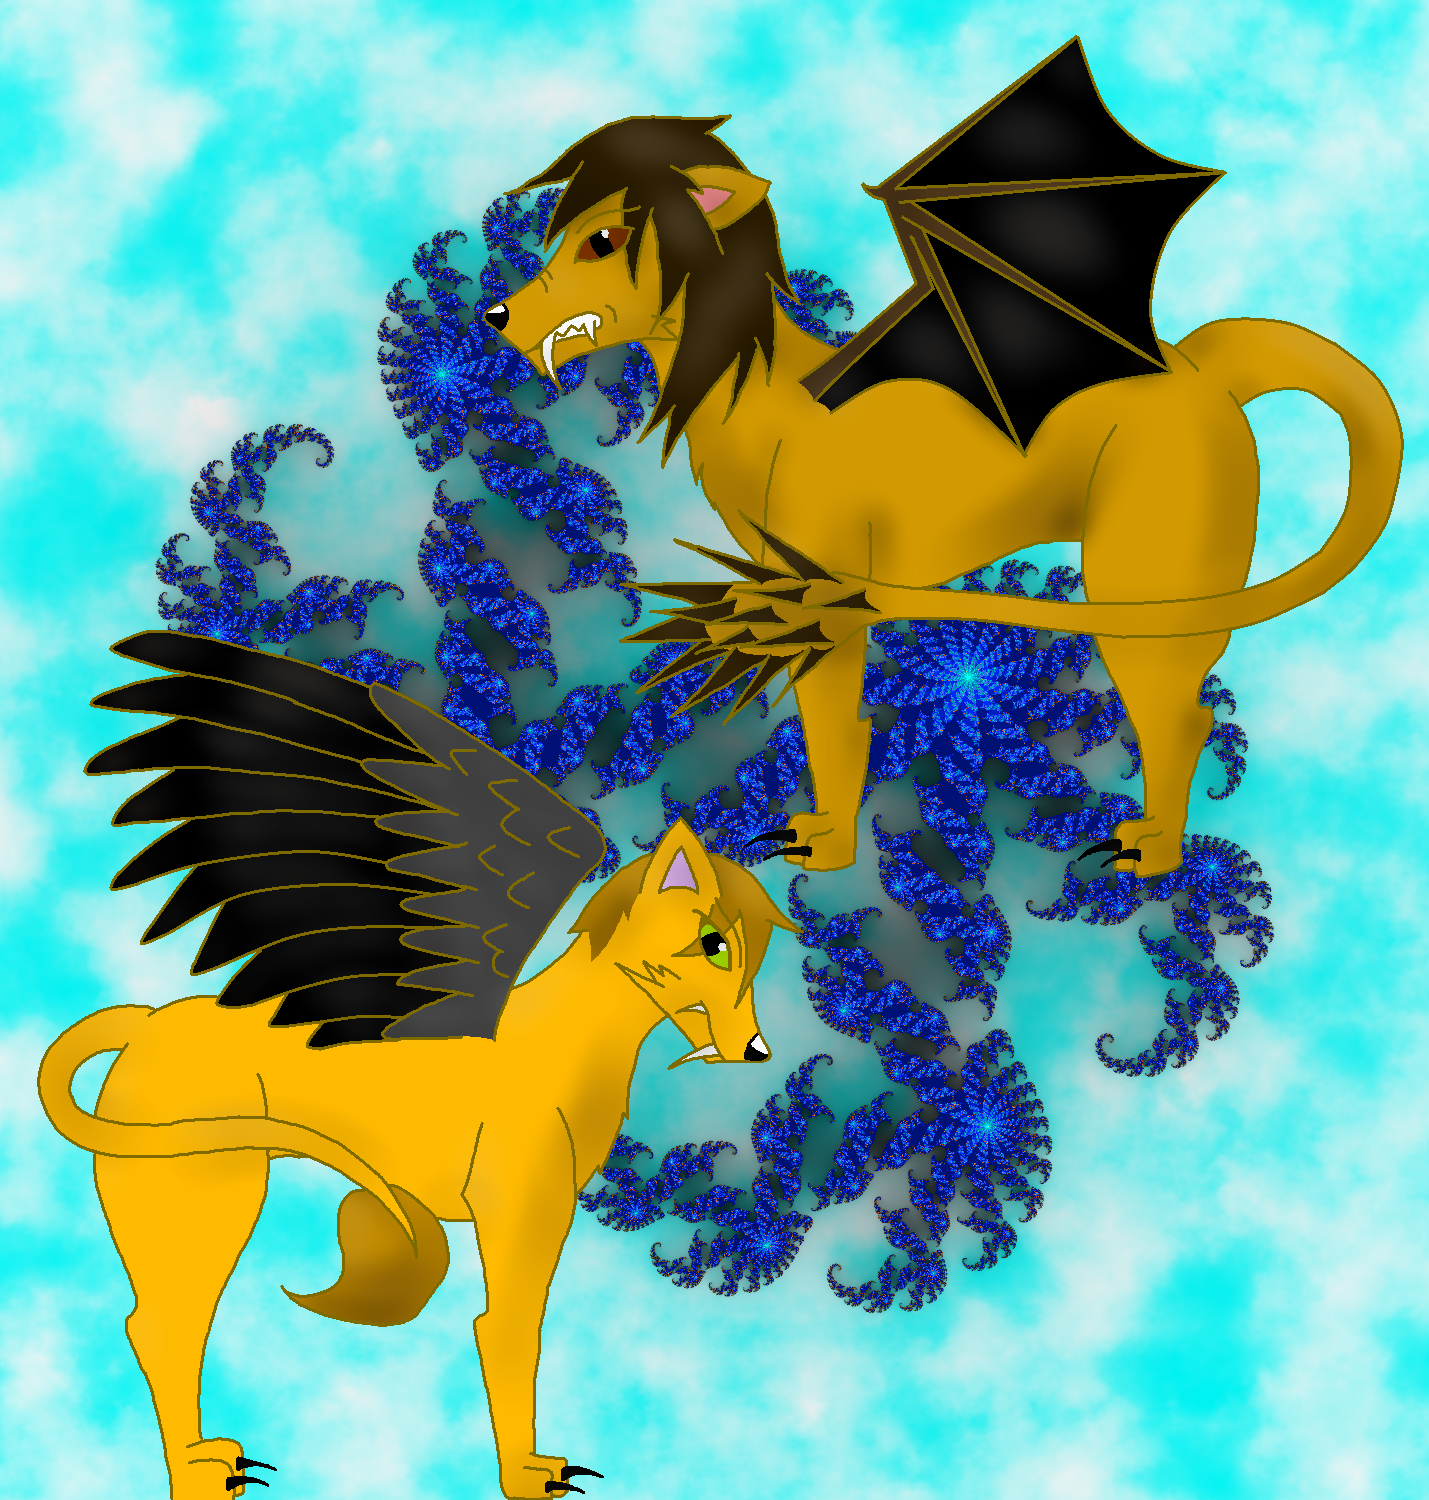 Manticore and Sphinx by Hamstar27